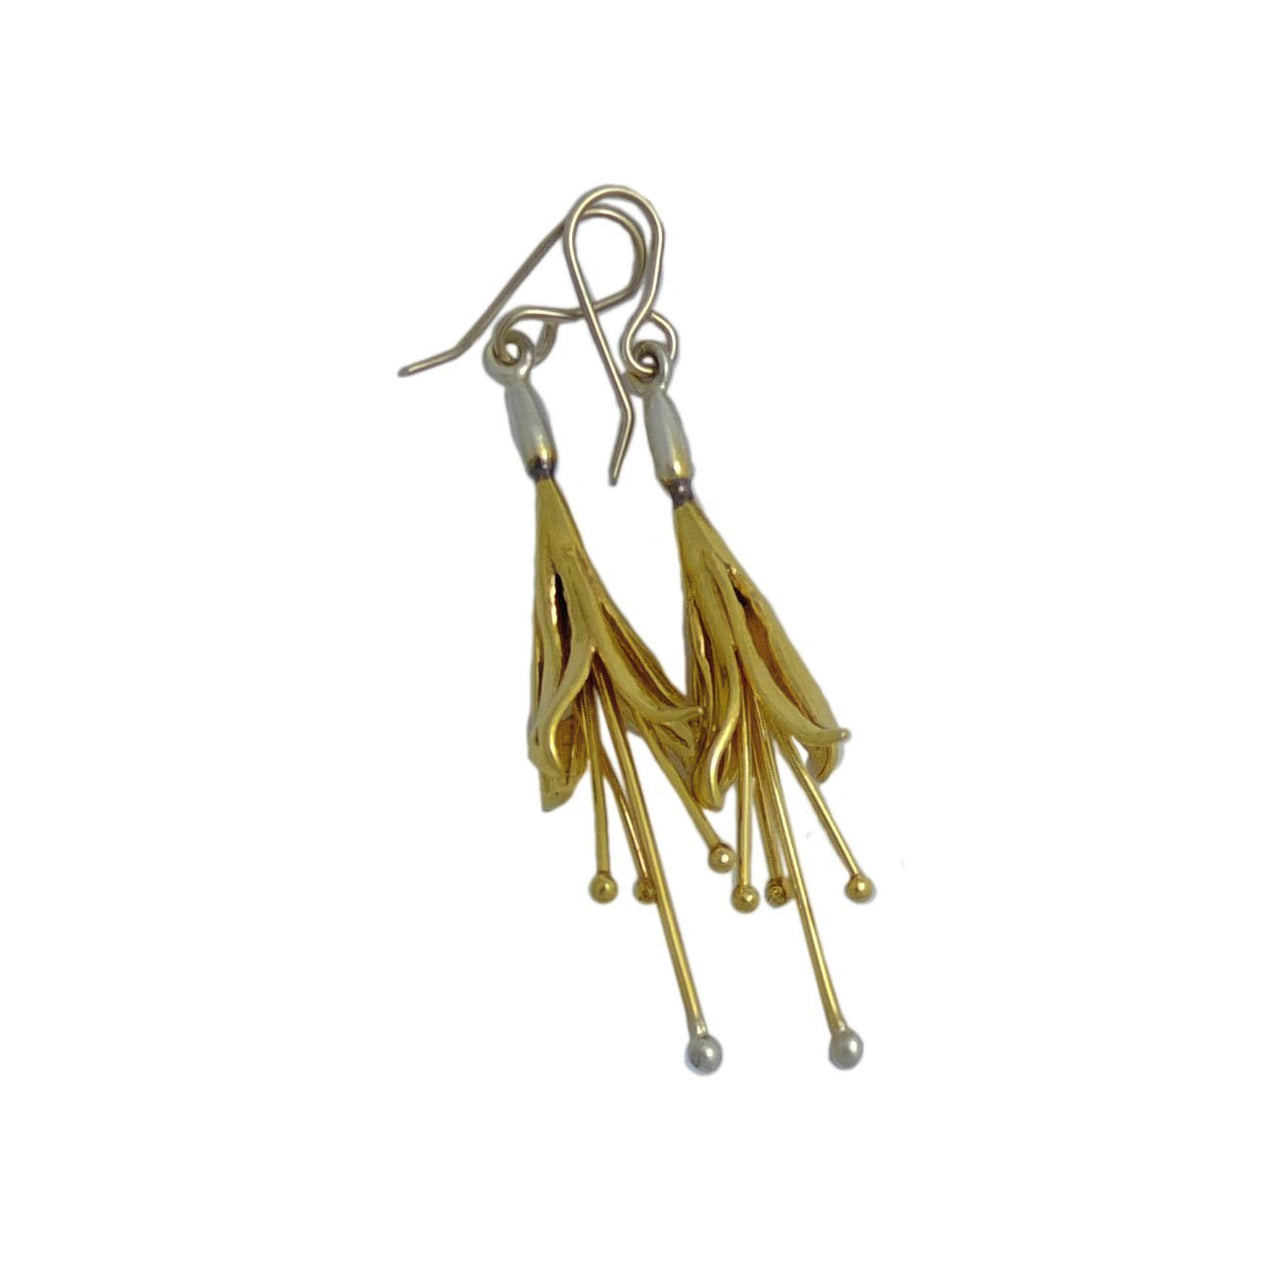 Kōtukutuku earrings, silver with a gold vermiel surface